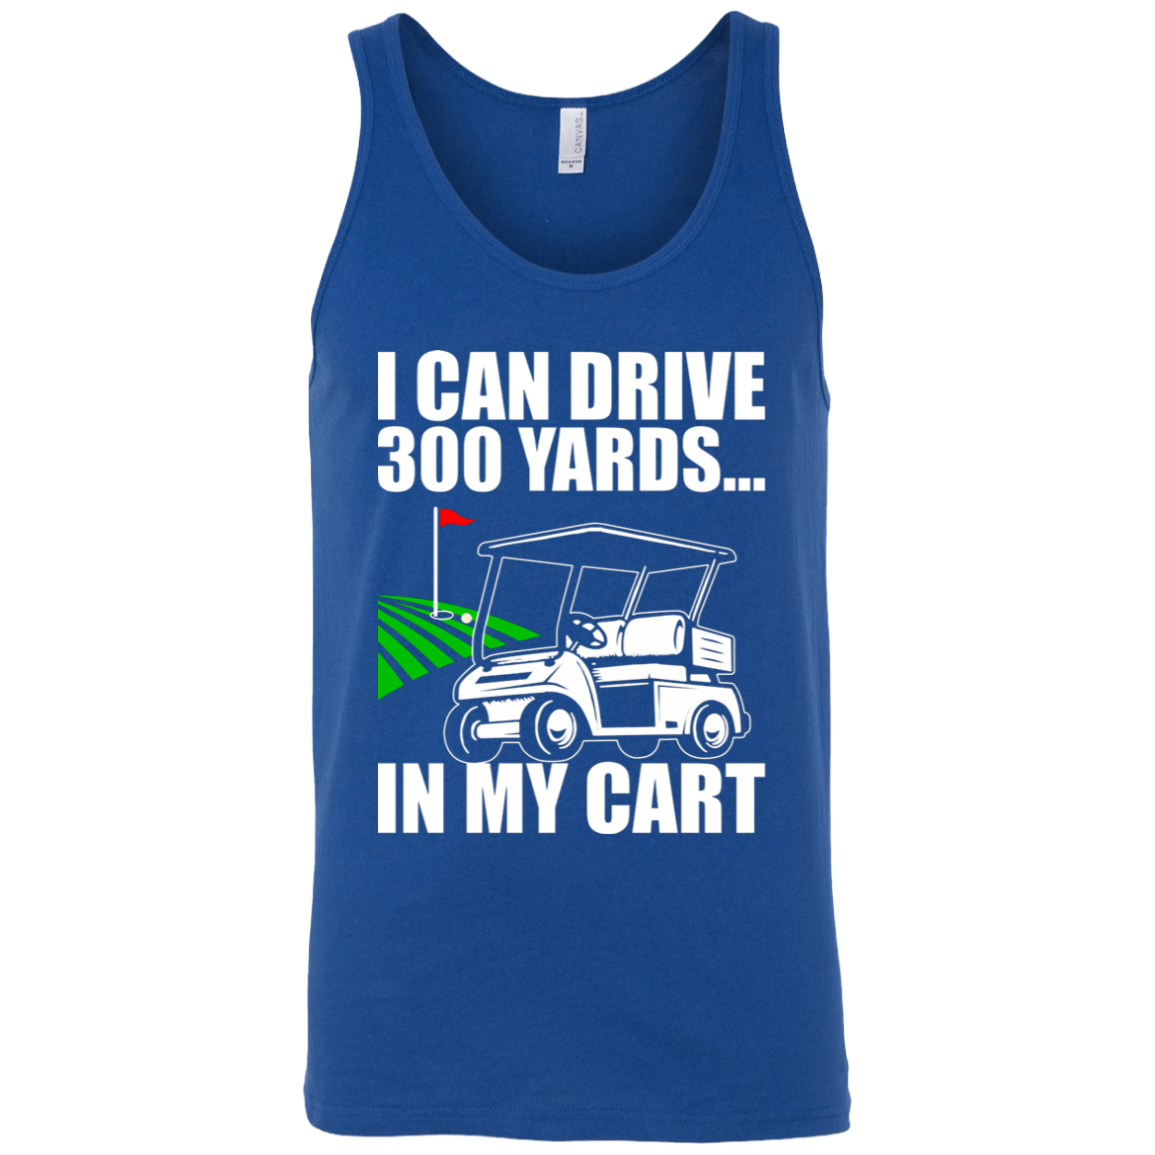 I Can Drive 300 Yards In My Cart Tank Top Apparel - The Beer Lodge